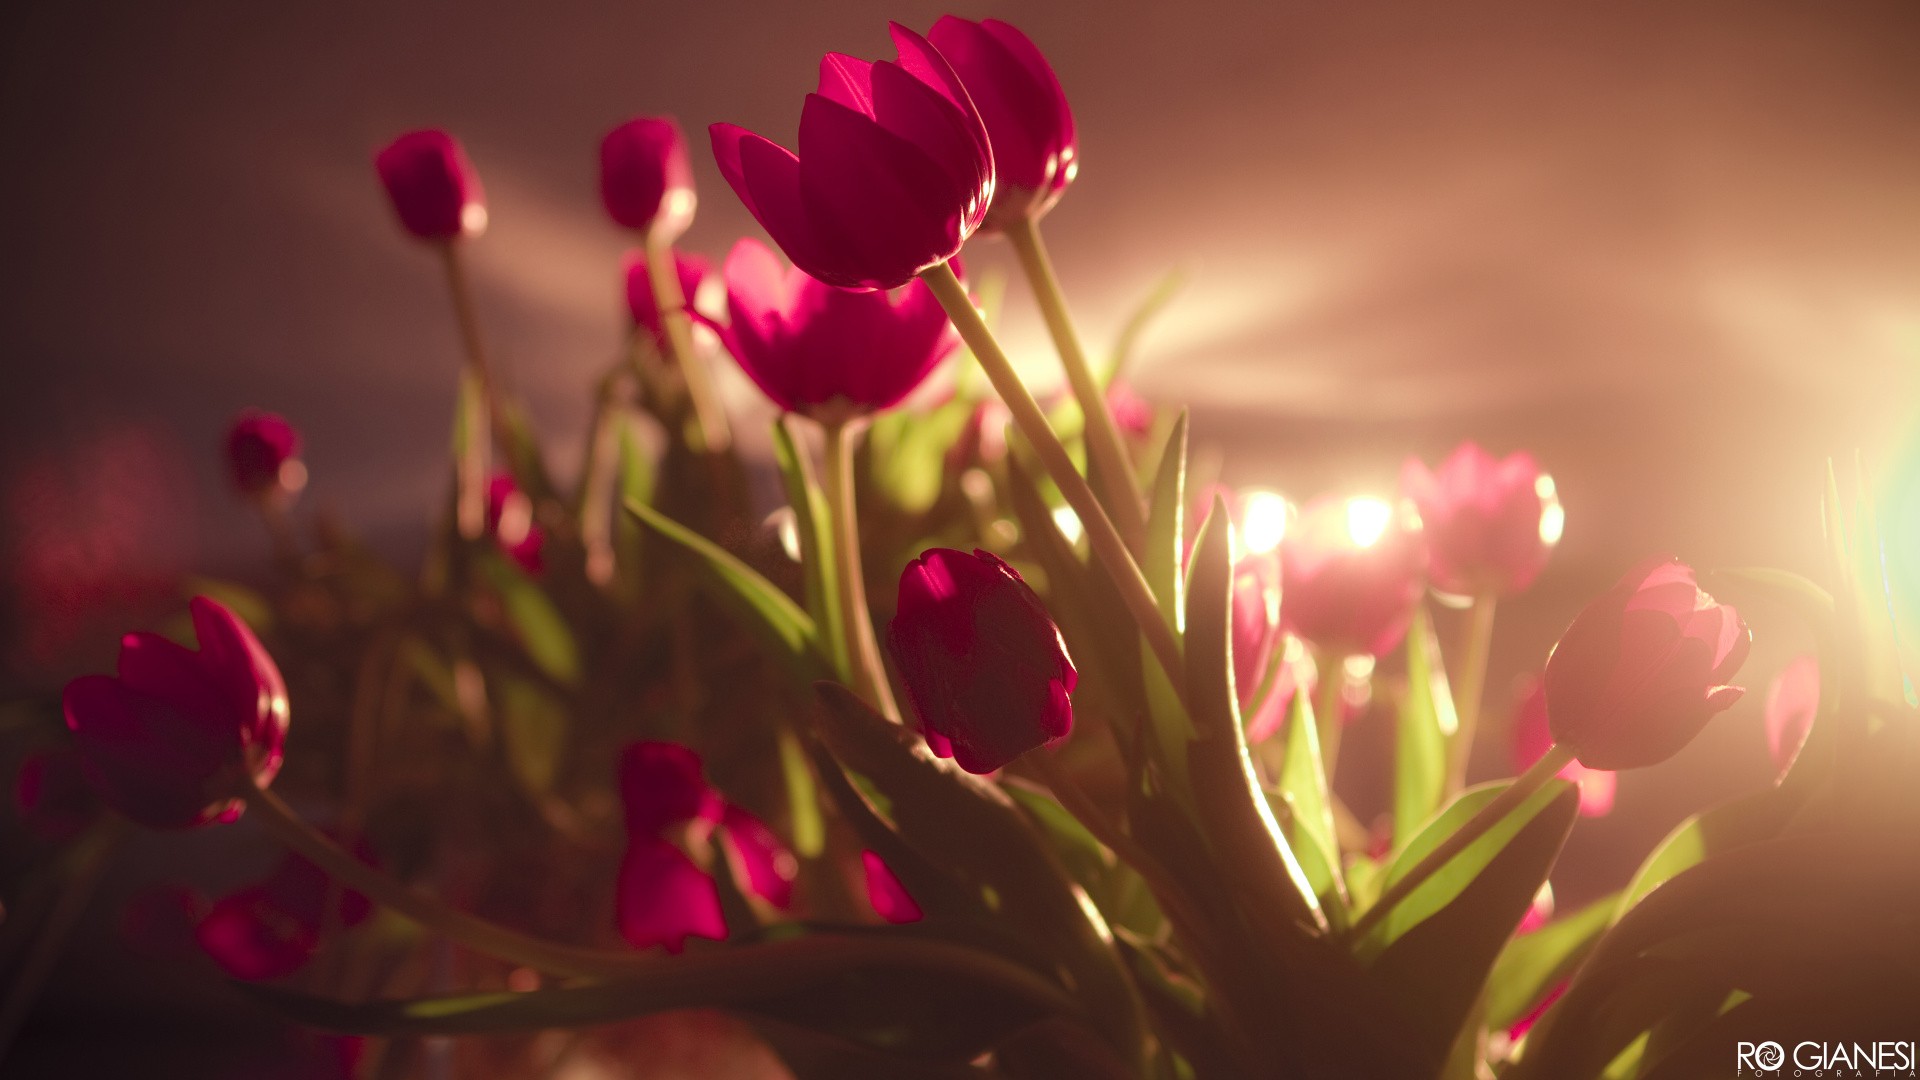 General 1920x1080 tulips flowers pink flowers sunlight plants red flowers vibrant warm colors